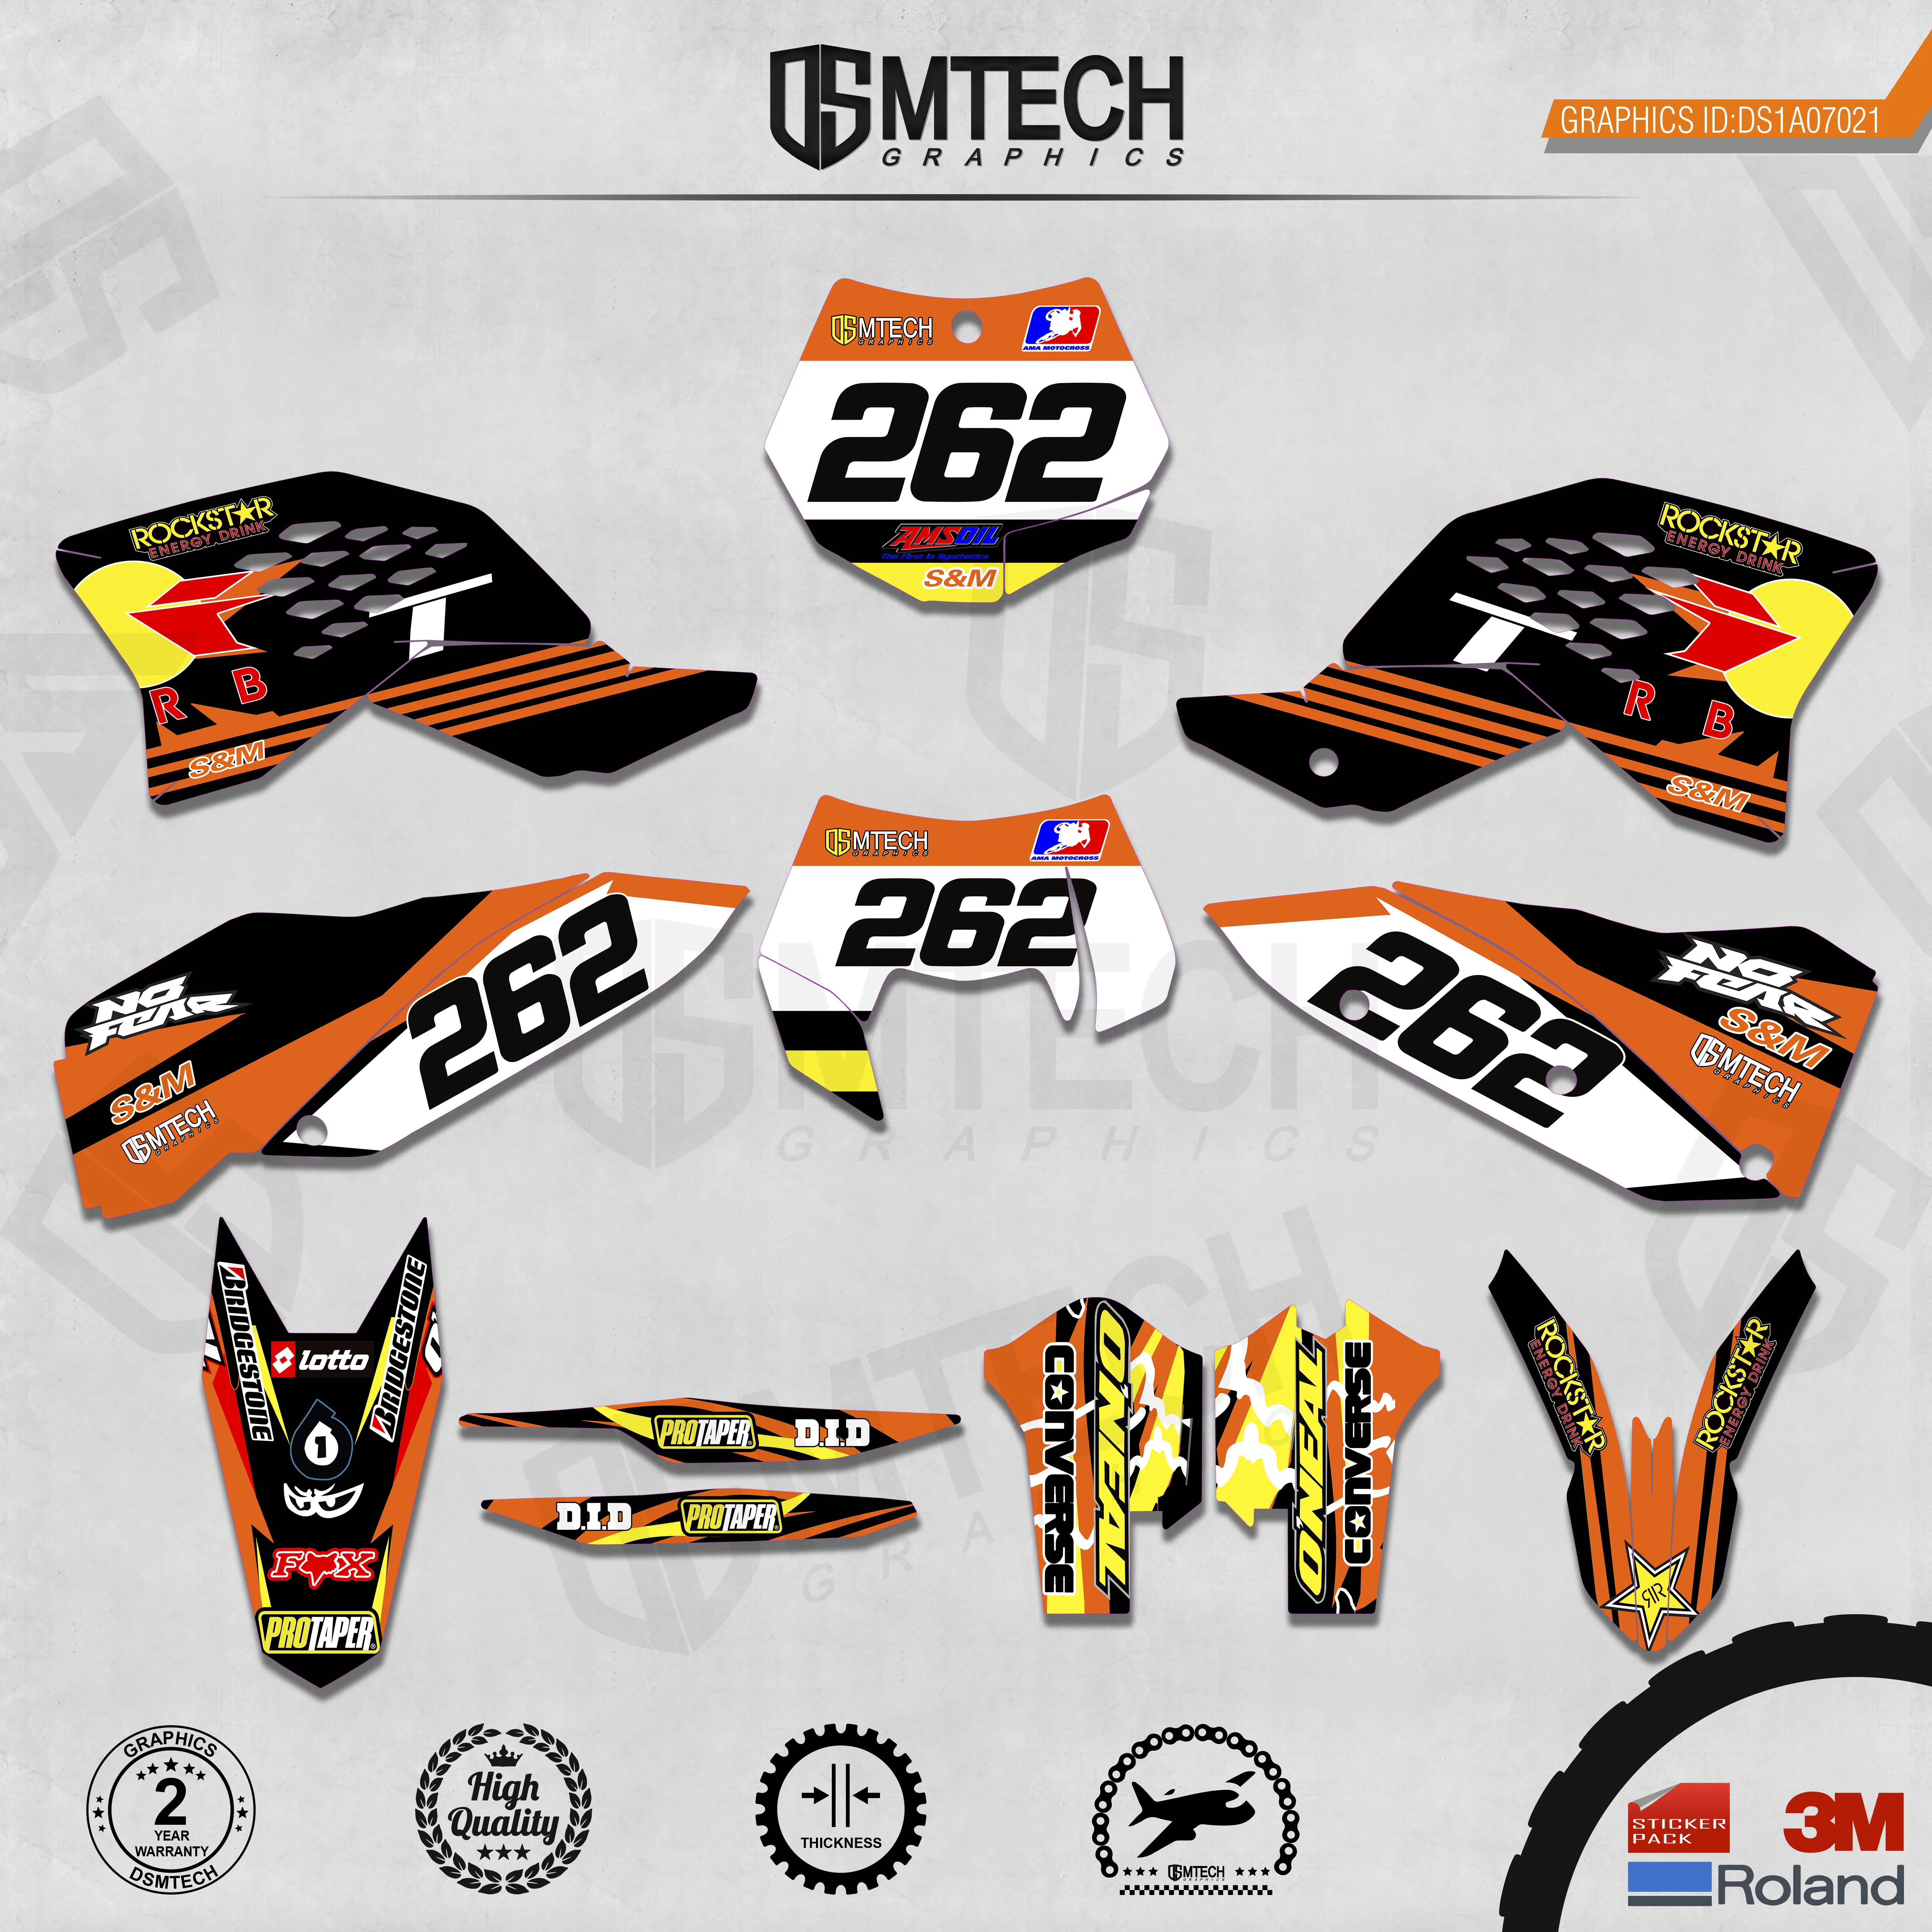 DSMTECH Customized Team Graphics Backgrounds Decals 3M Custom Stickers For 2007-2010 SXF 2008-2011 EXC Orange bar 021